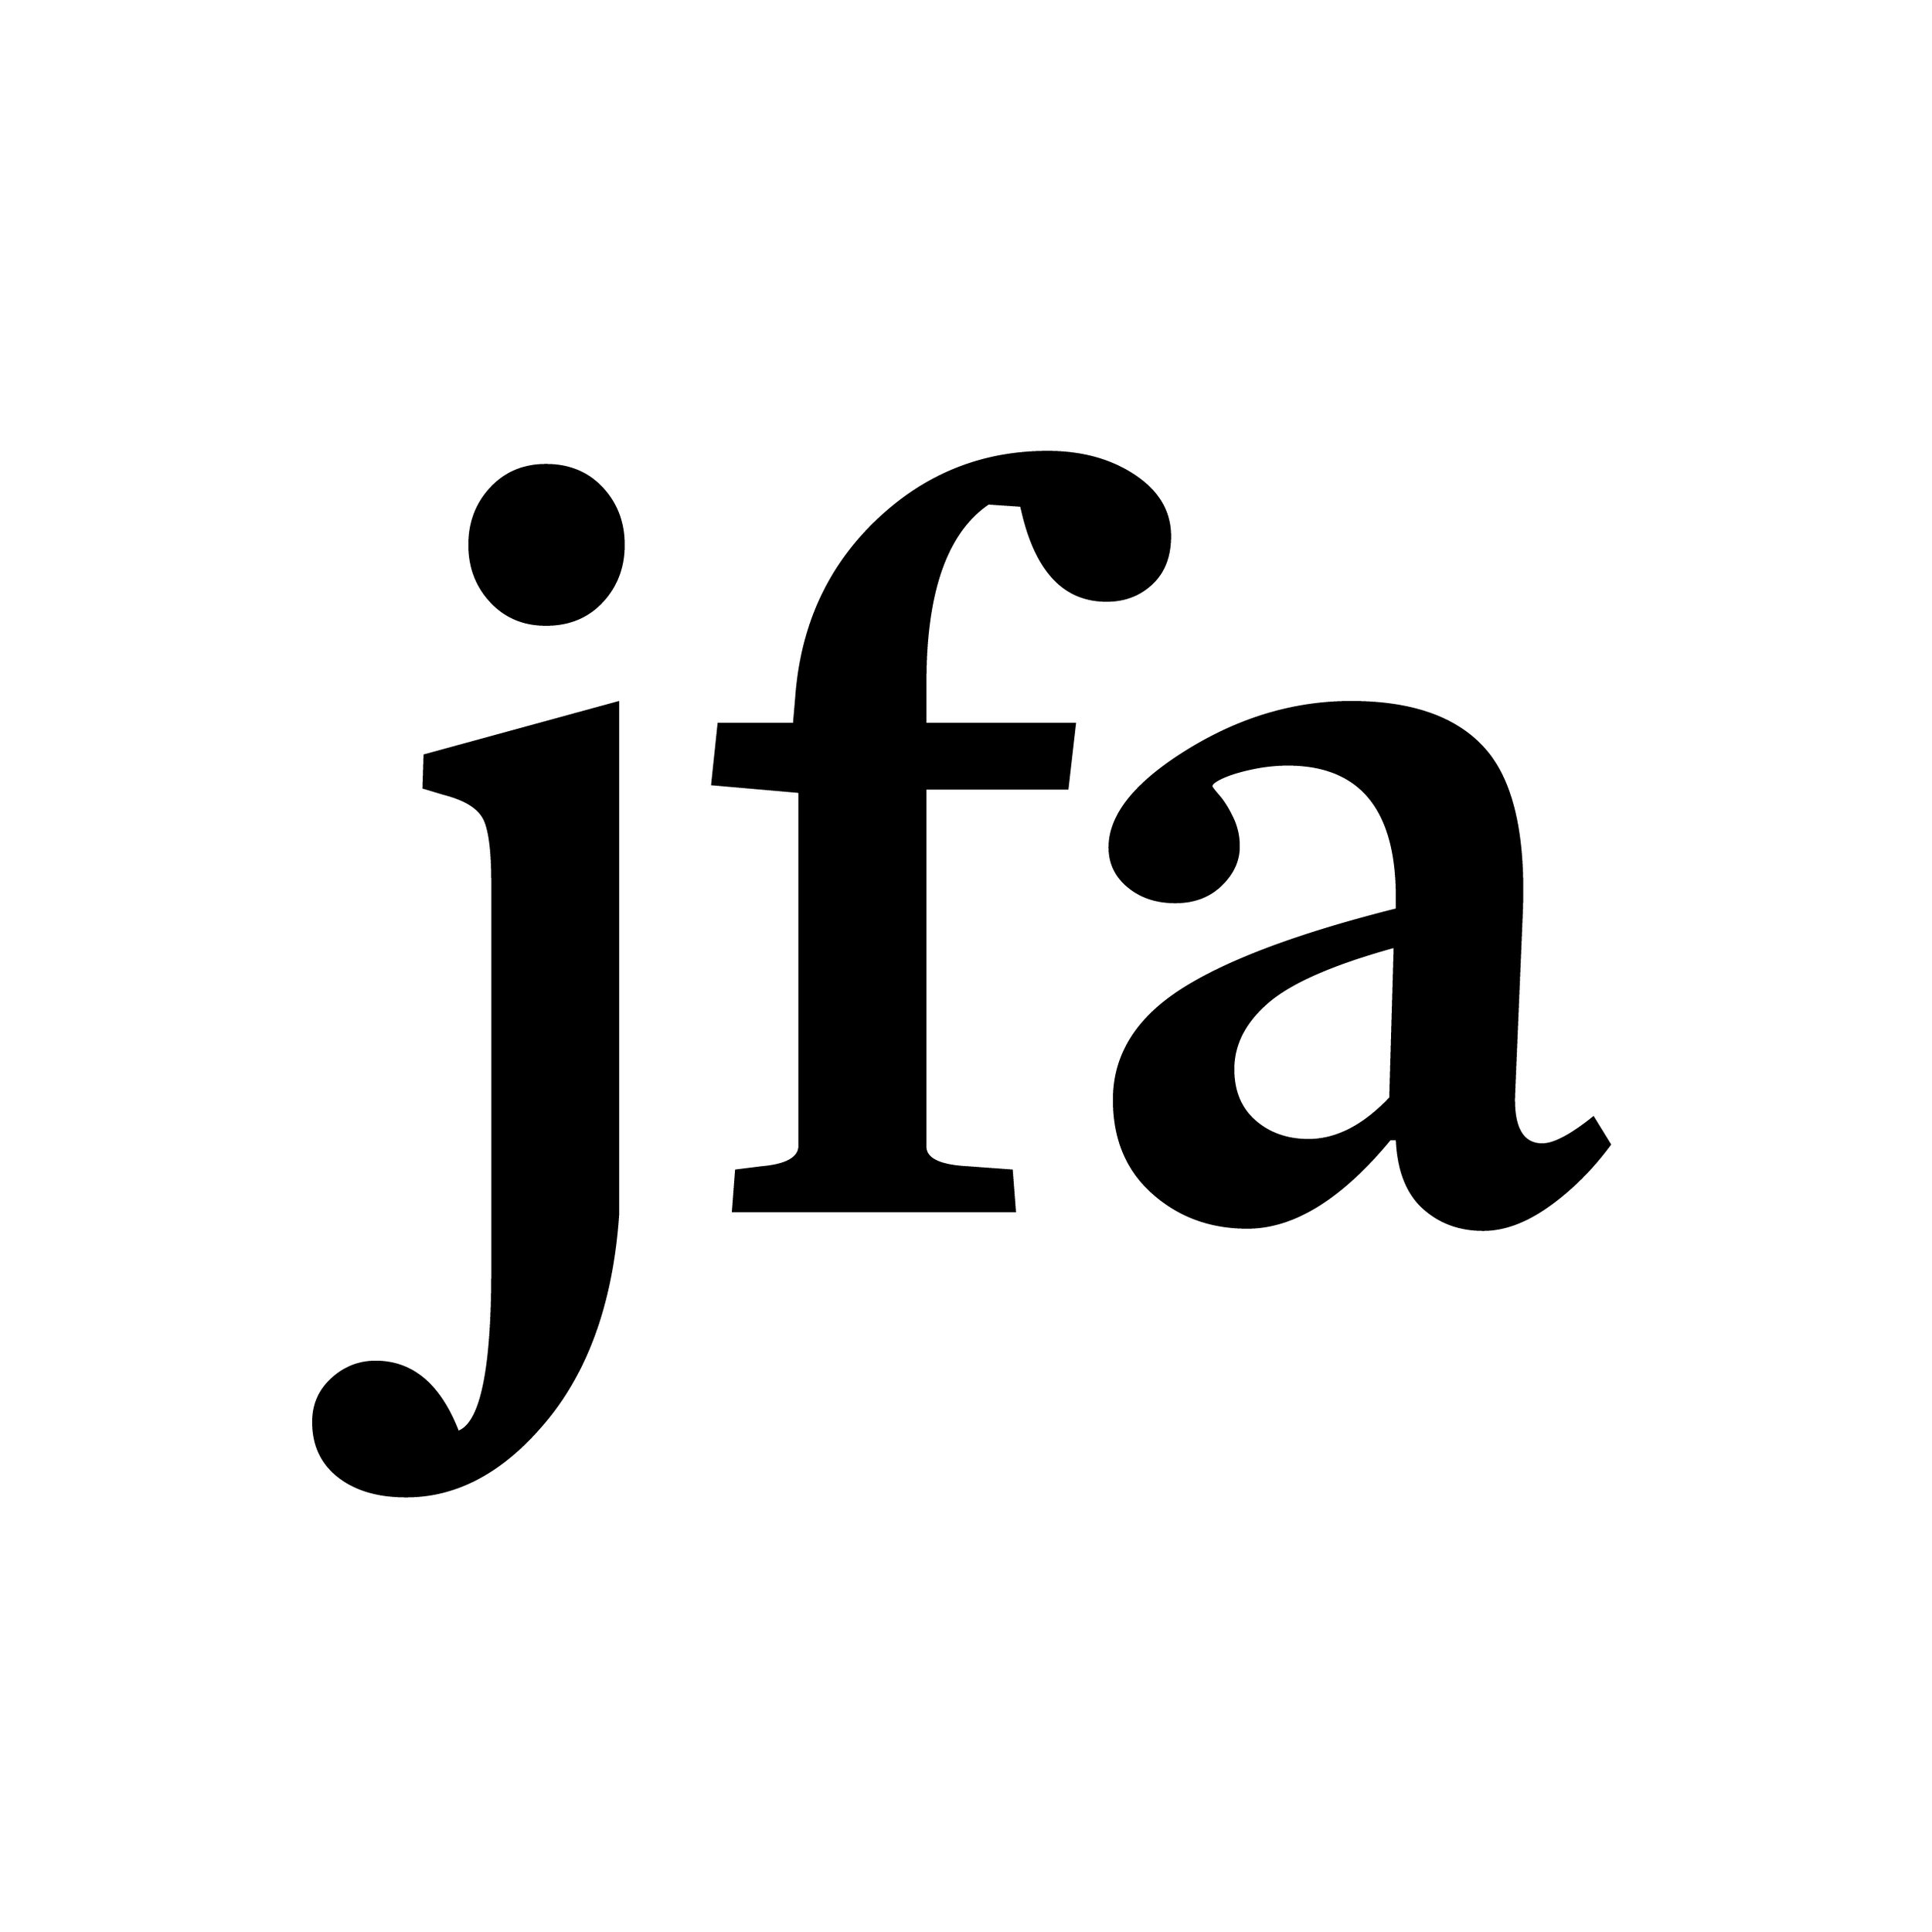 The jfa Human Rights Journal